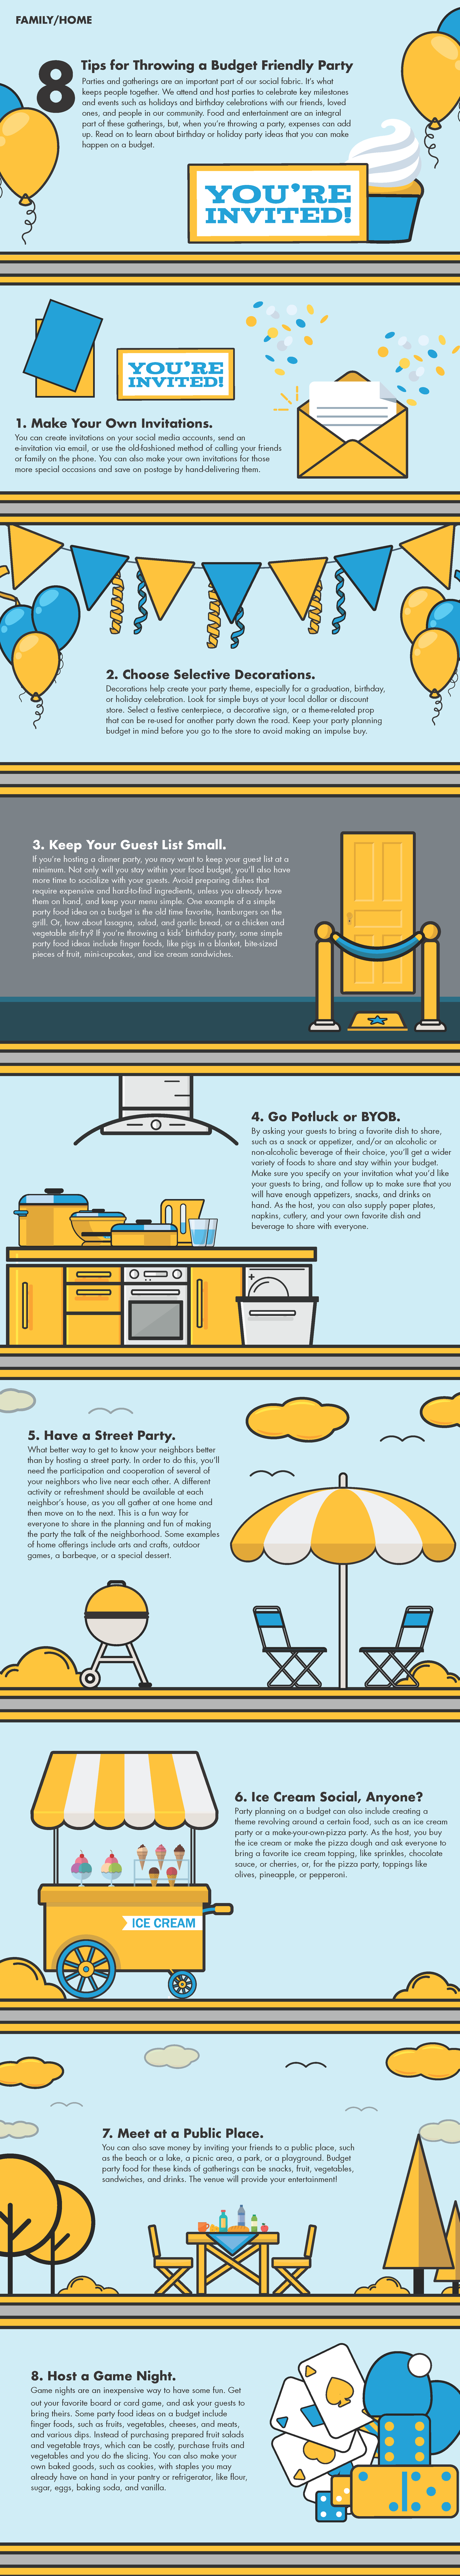 Tips For Budget Friendly Party